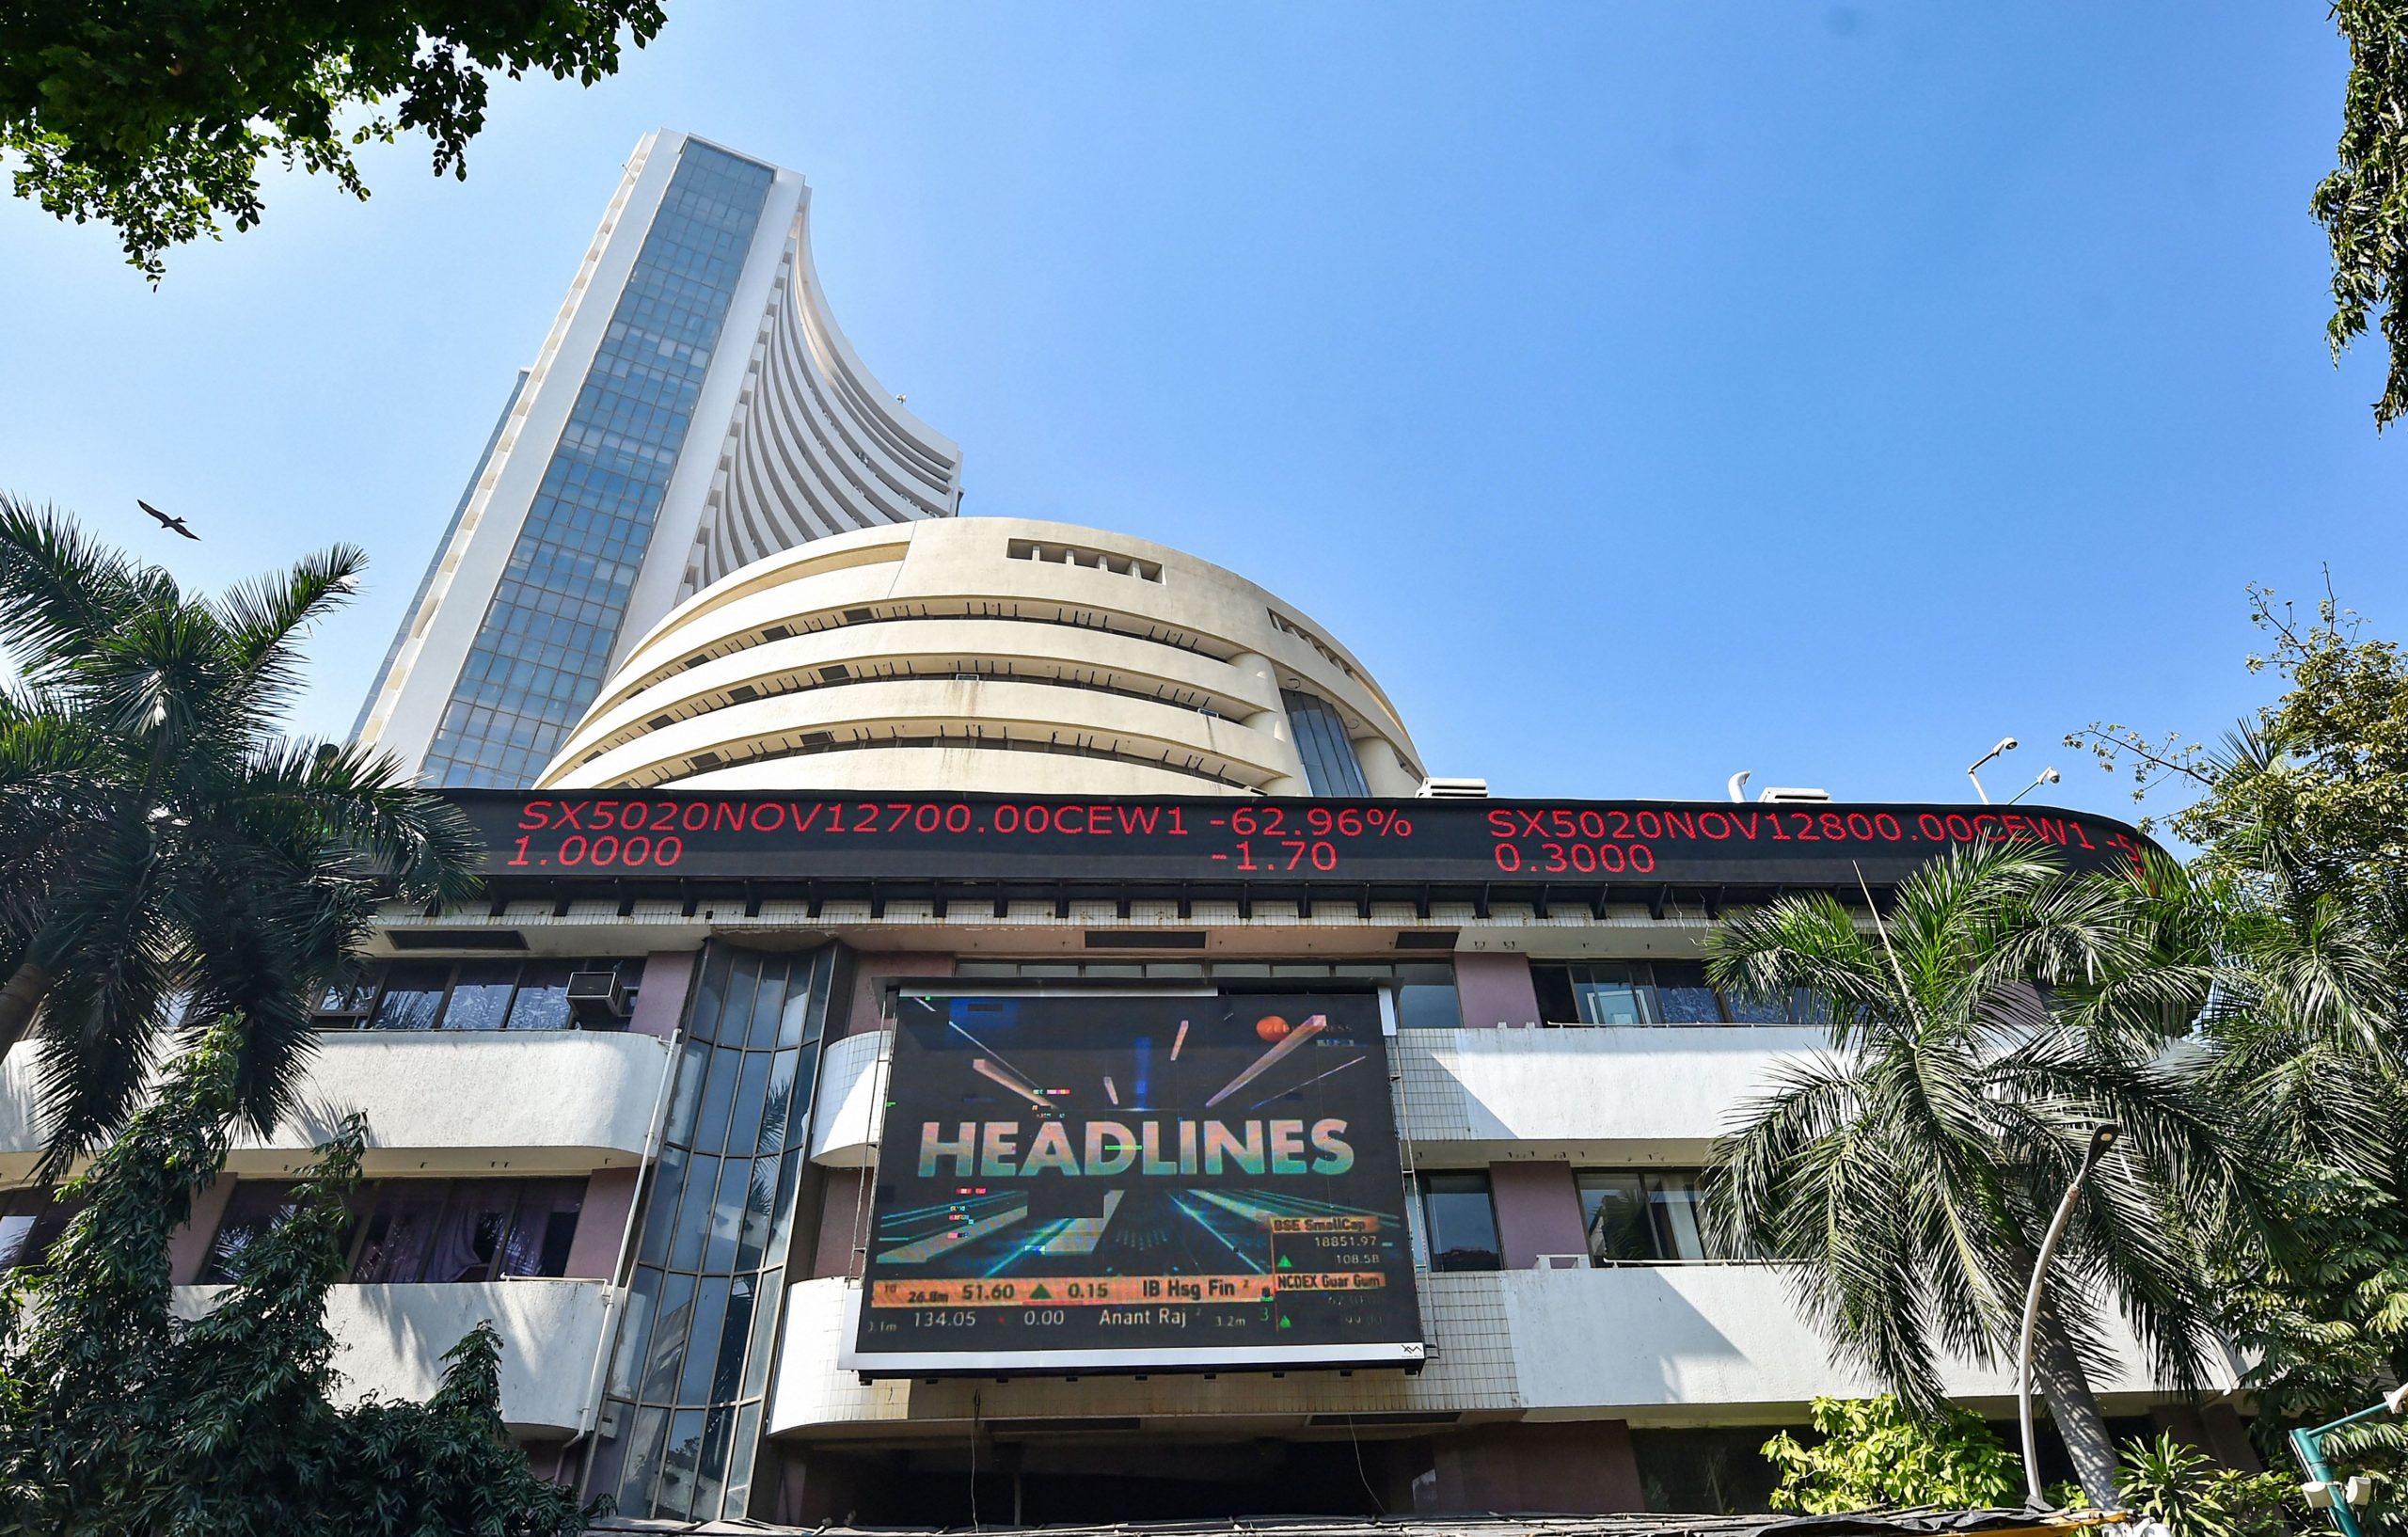 Trending Stocks: Siemens, Pidilite, Paytm, Grasim and others in news today